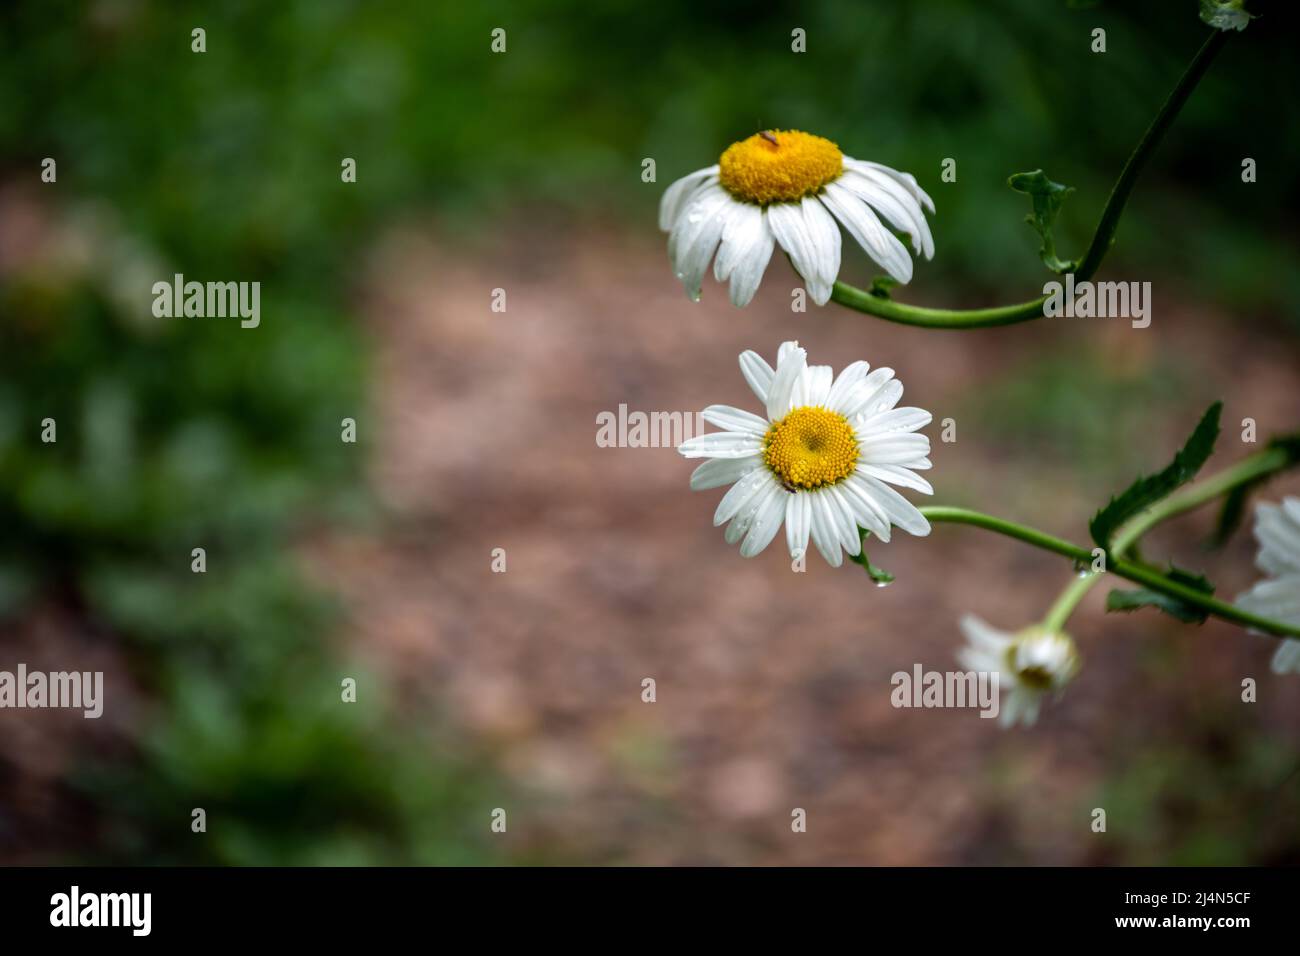 A nice bokeh background draws the eye to the pretty white and yellow daisies. A gentle rain shower has just ended in Missouri. Stock Photo